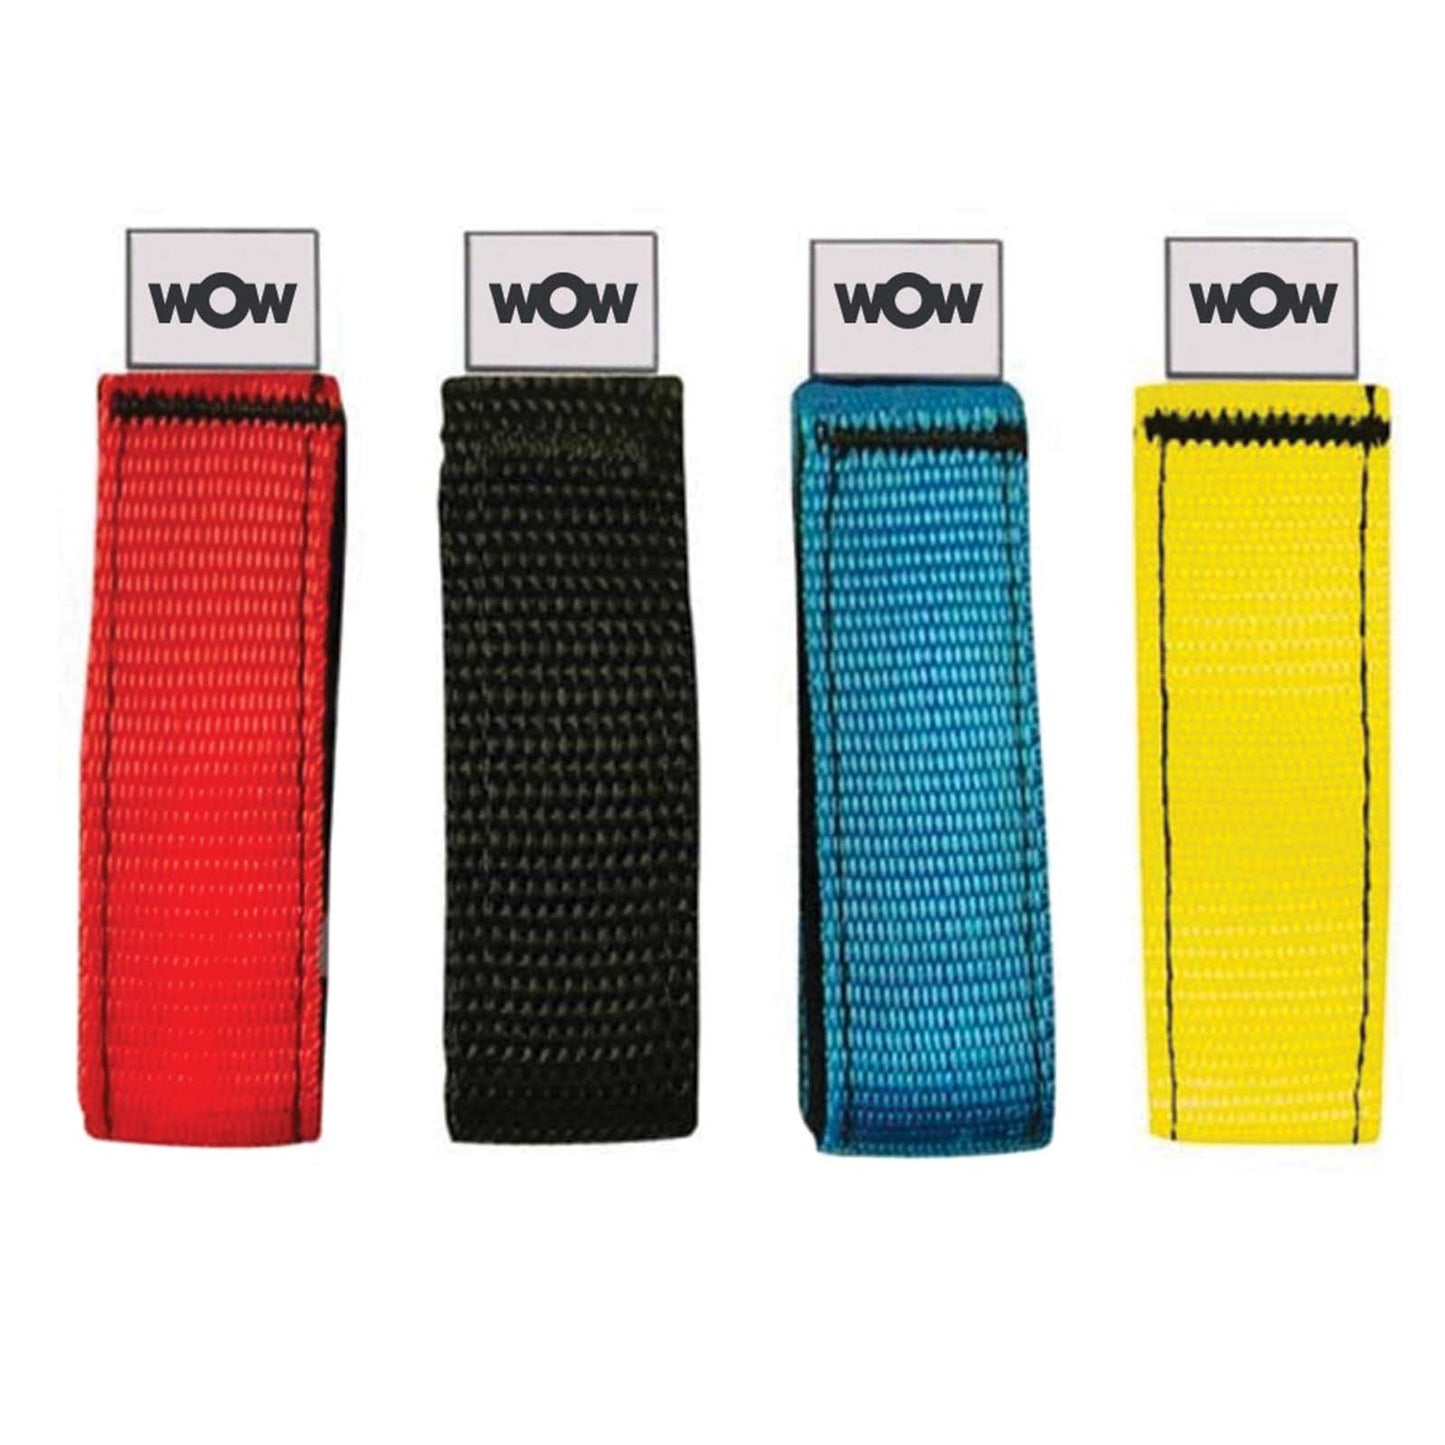 WOW Straps - 100pc pack